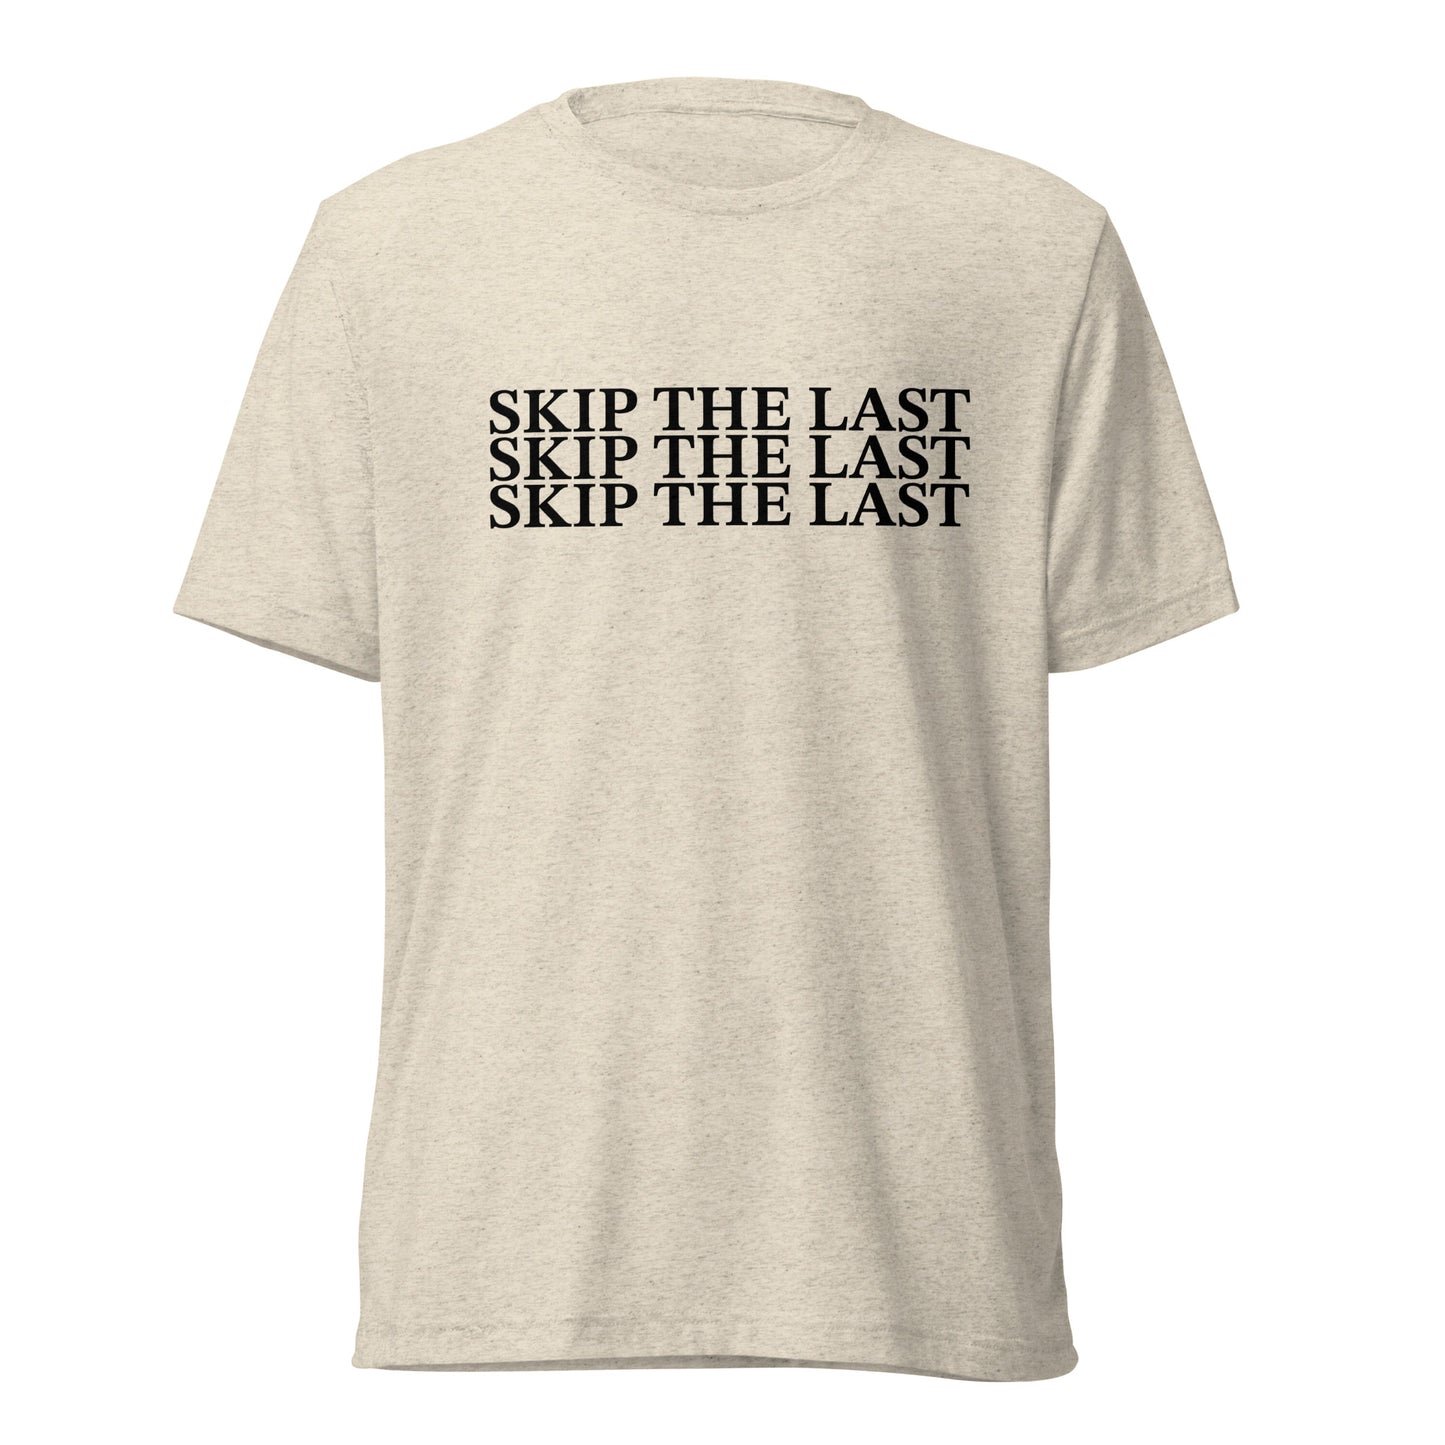 Two More Skip The Last "Skip the Last x3" oatmeal unisex tri-blend t-shirt. Front view